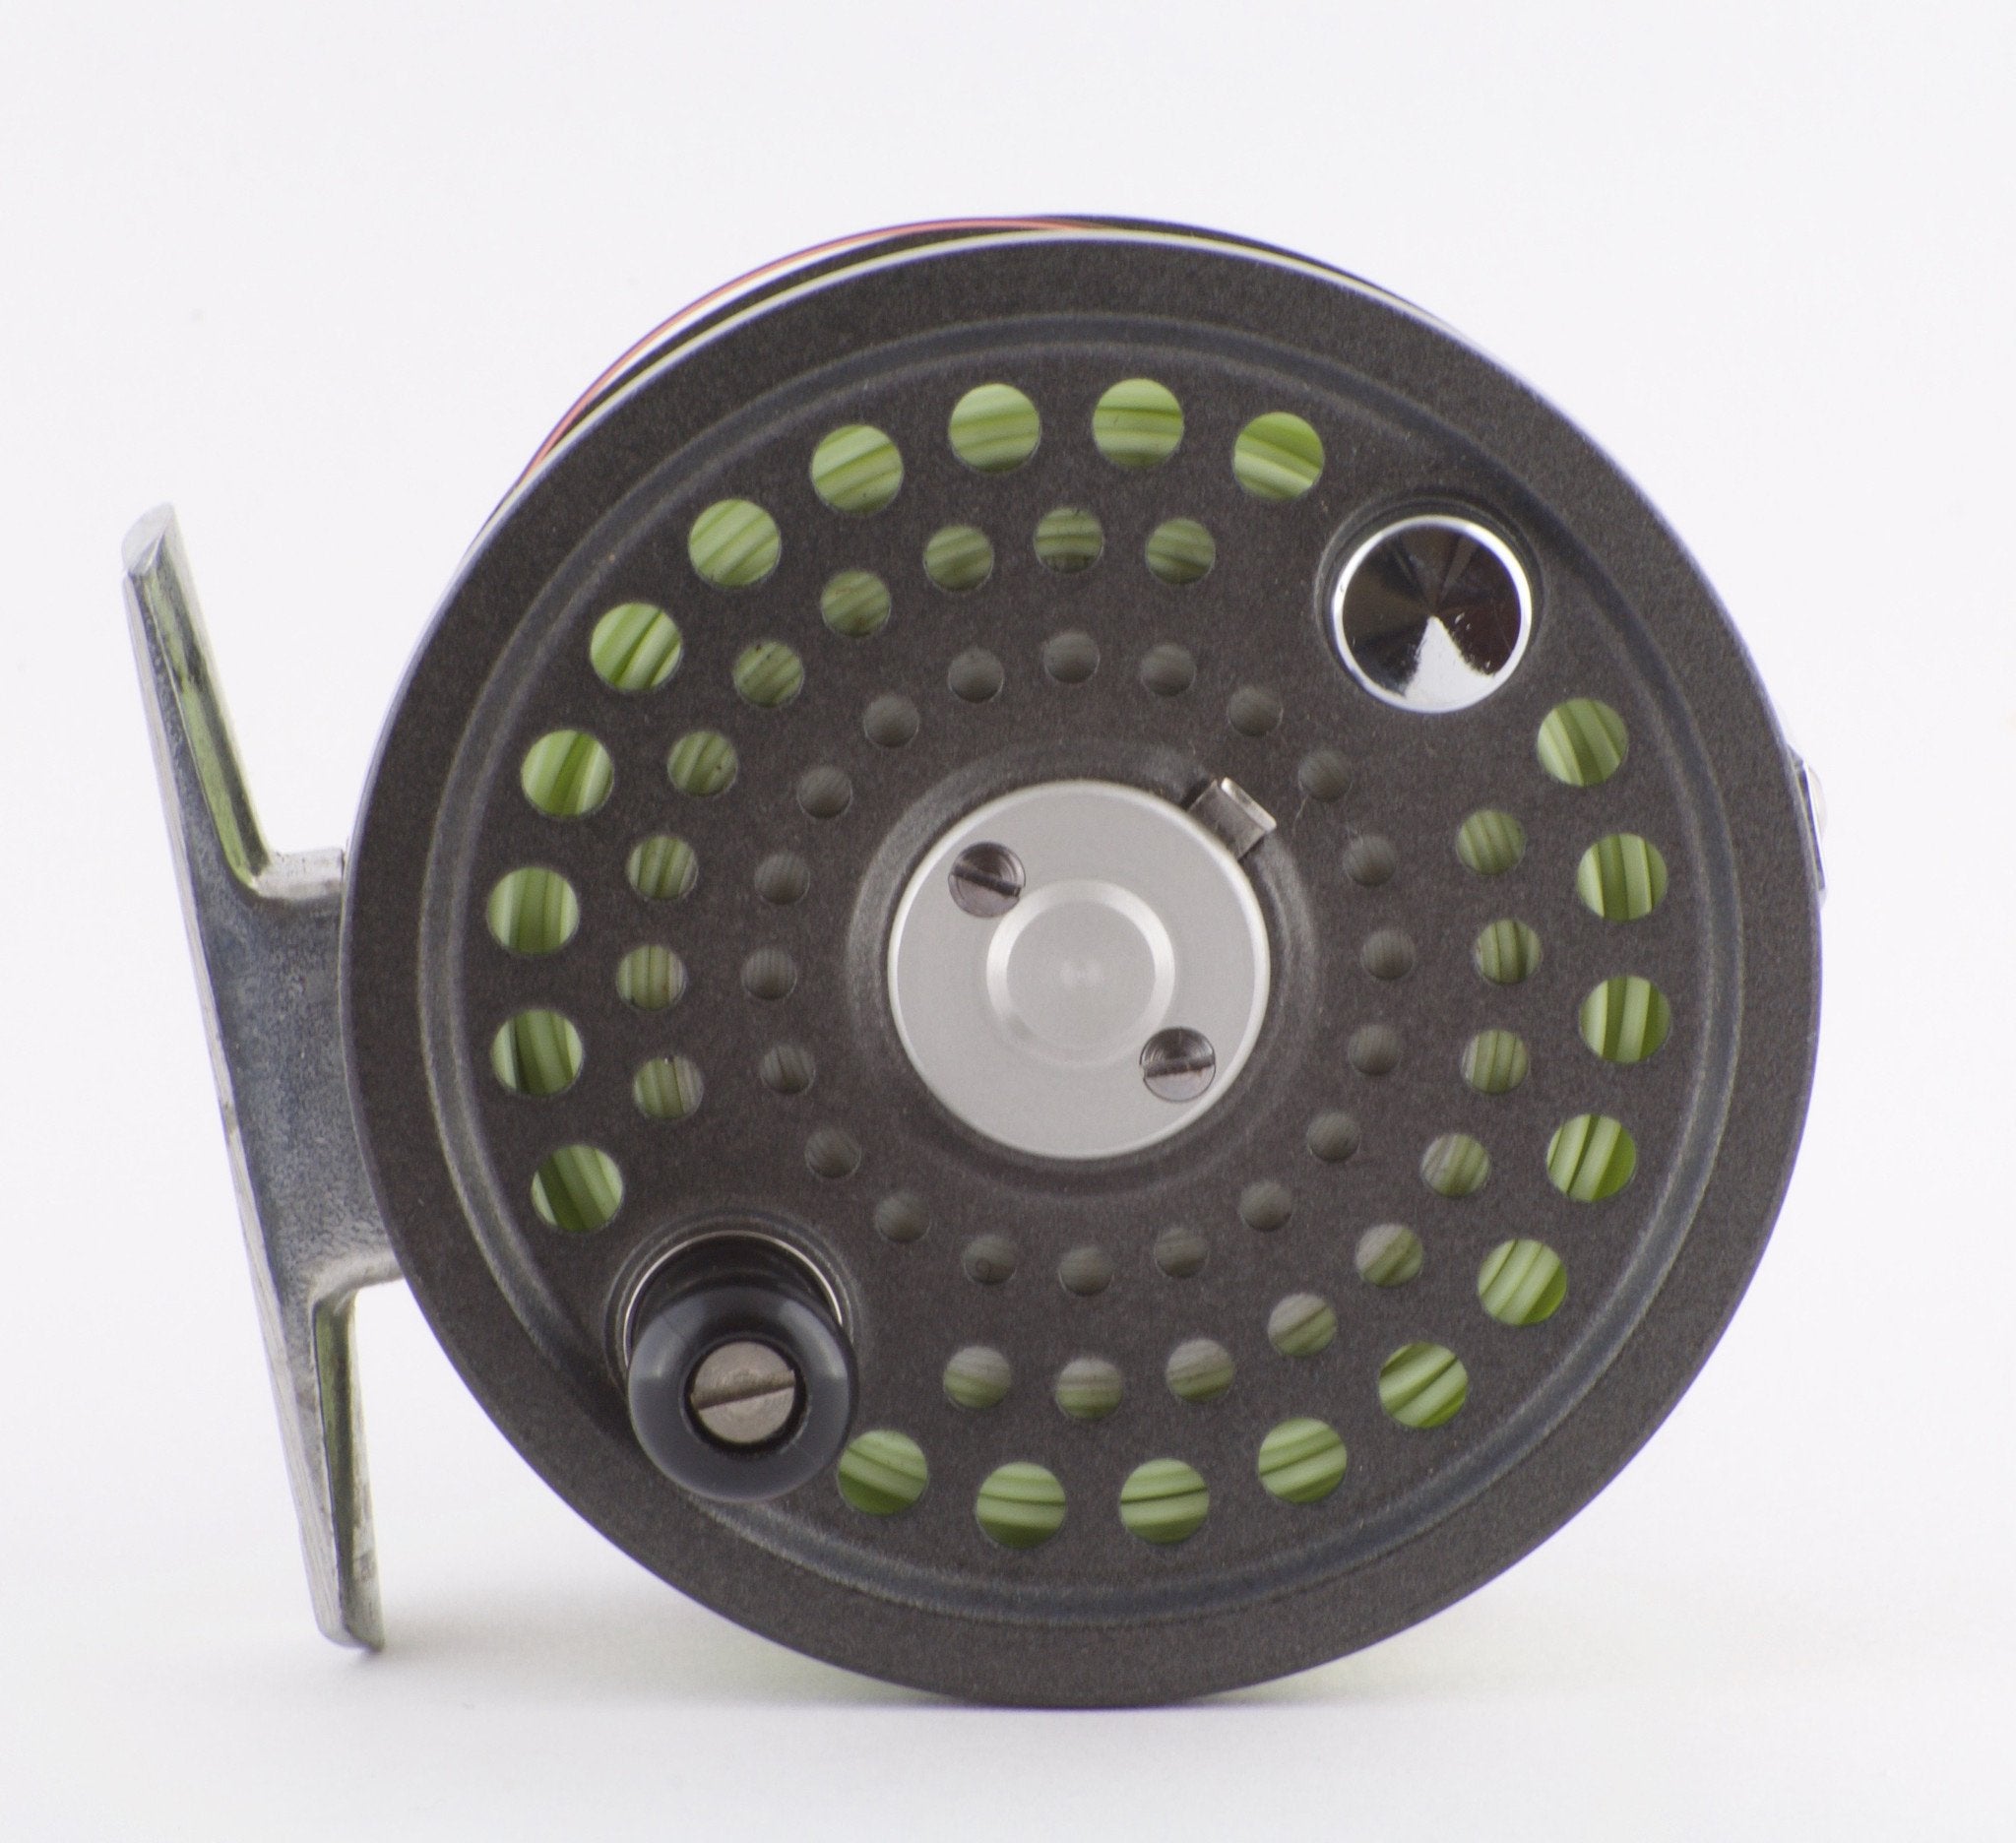 Orvis Batten Kill Reel With Spool, Box And Case